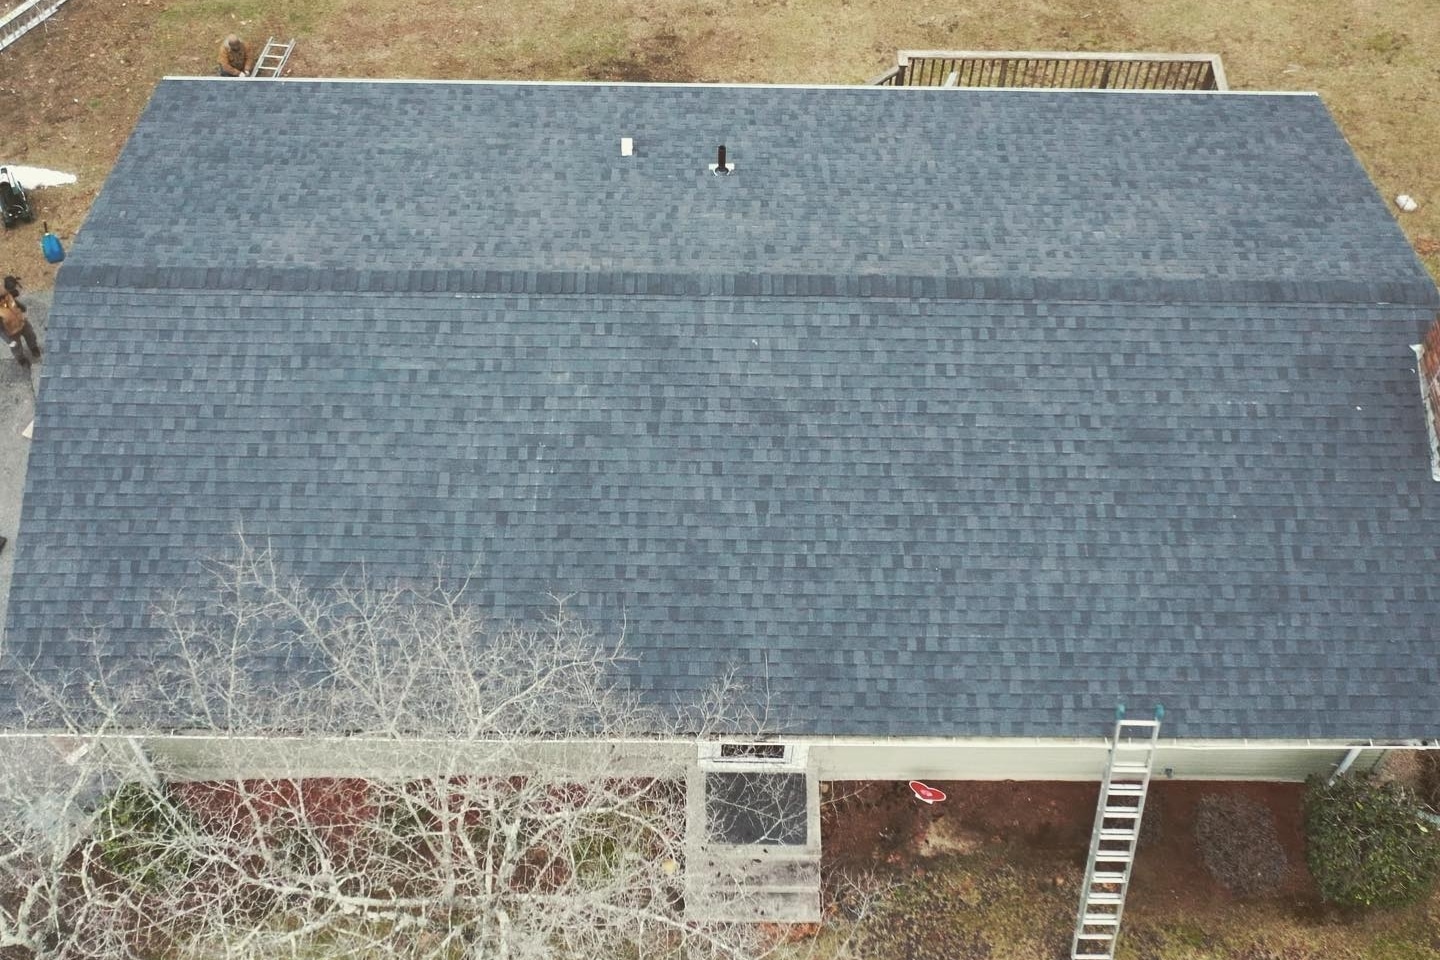 BP Builder Company in CT | Roofer, Roof Replacement, Roofing Company & General Contractor CT